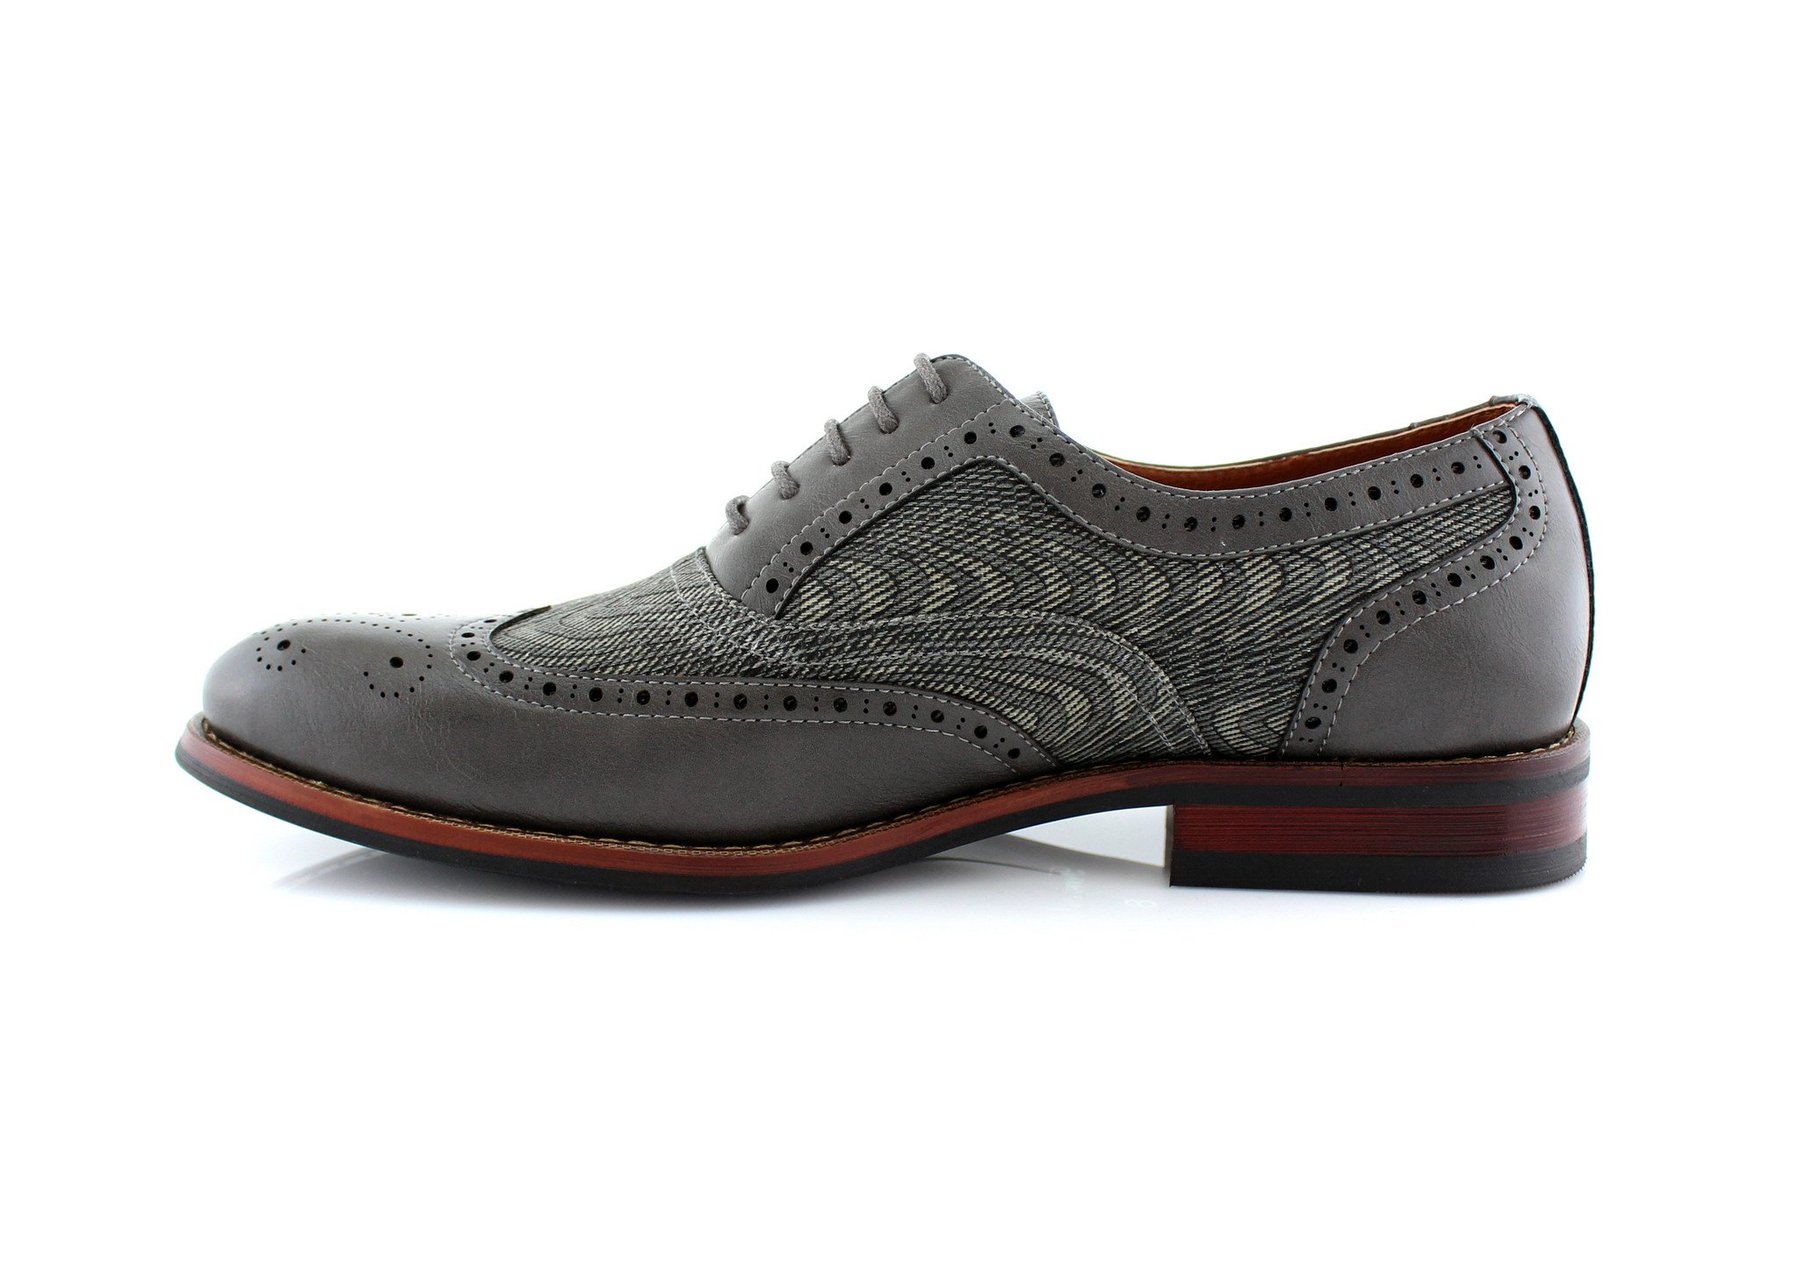 Ferro Aldo Alan M139001G Mens Classic Perforated Duo-Texture Lace-up Wingtip Oxford Dress Shoes - image 2 of 3